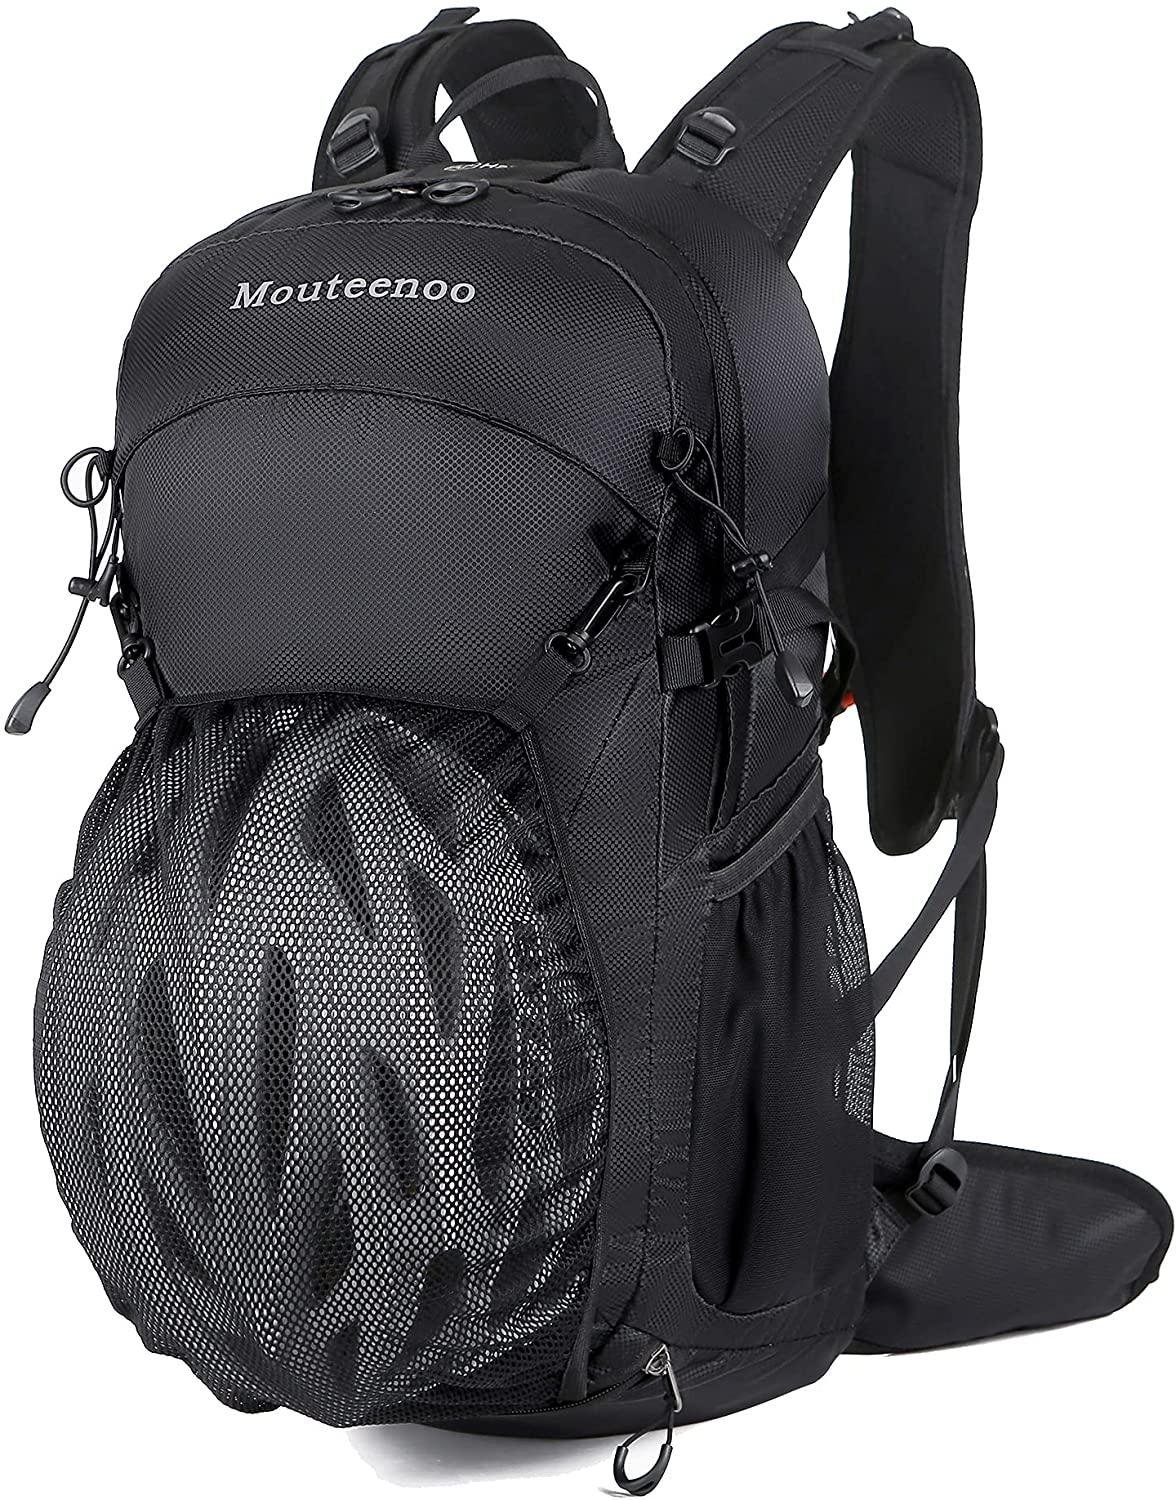 A backpack like this is spacious enough to carry any tools you may need and even food and clothes for your ride.